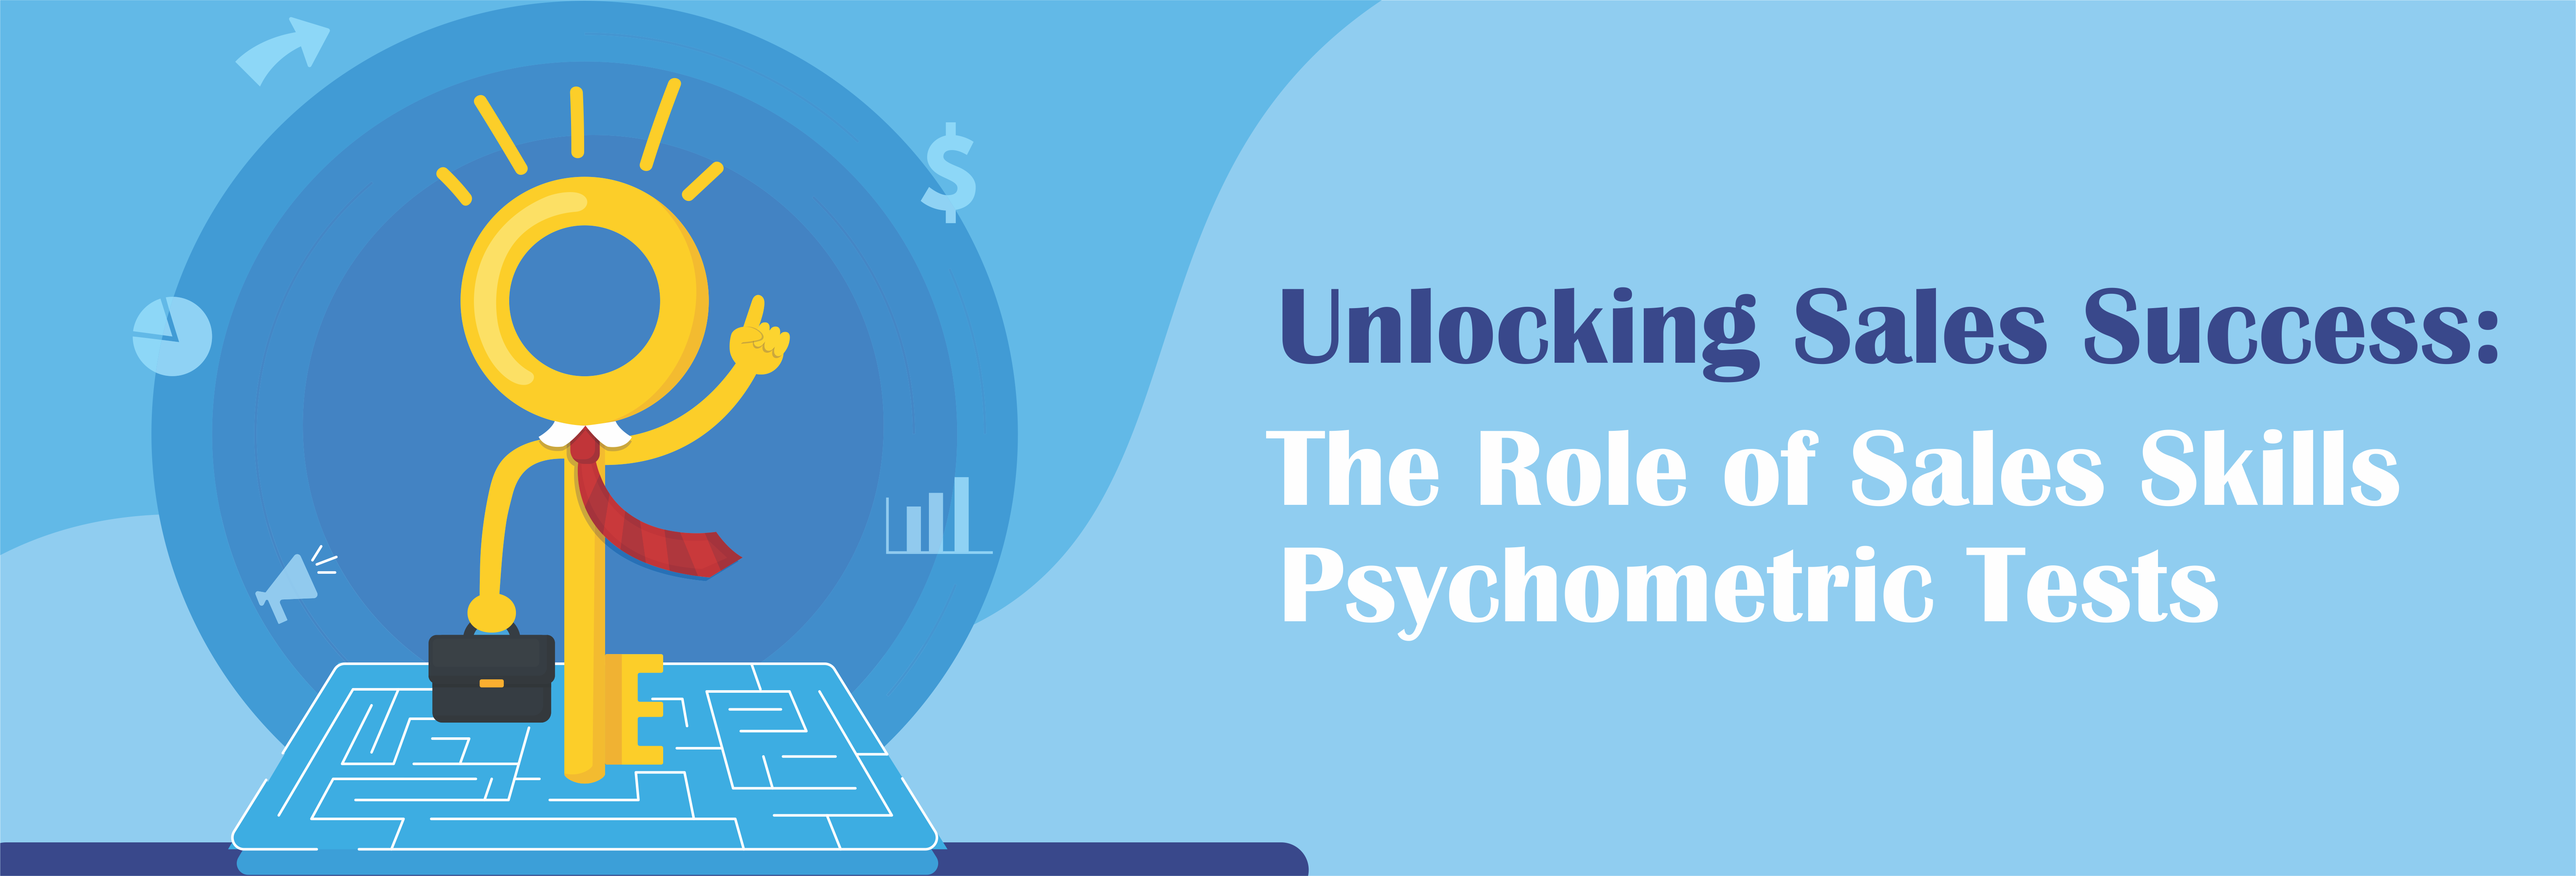 Role of Sales Skills Psychometric Tests